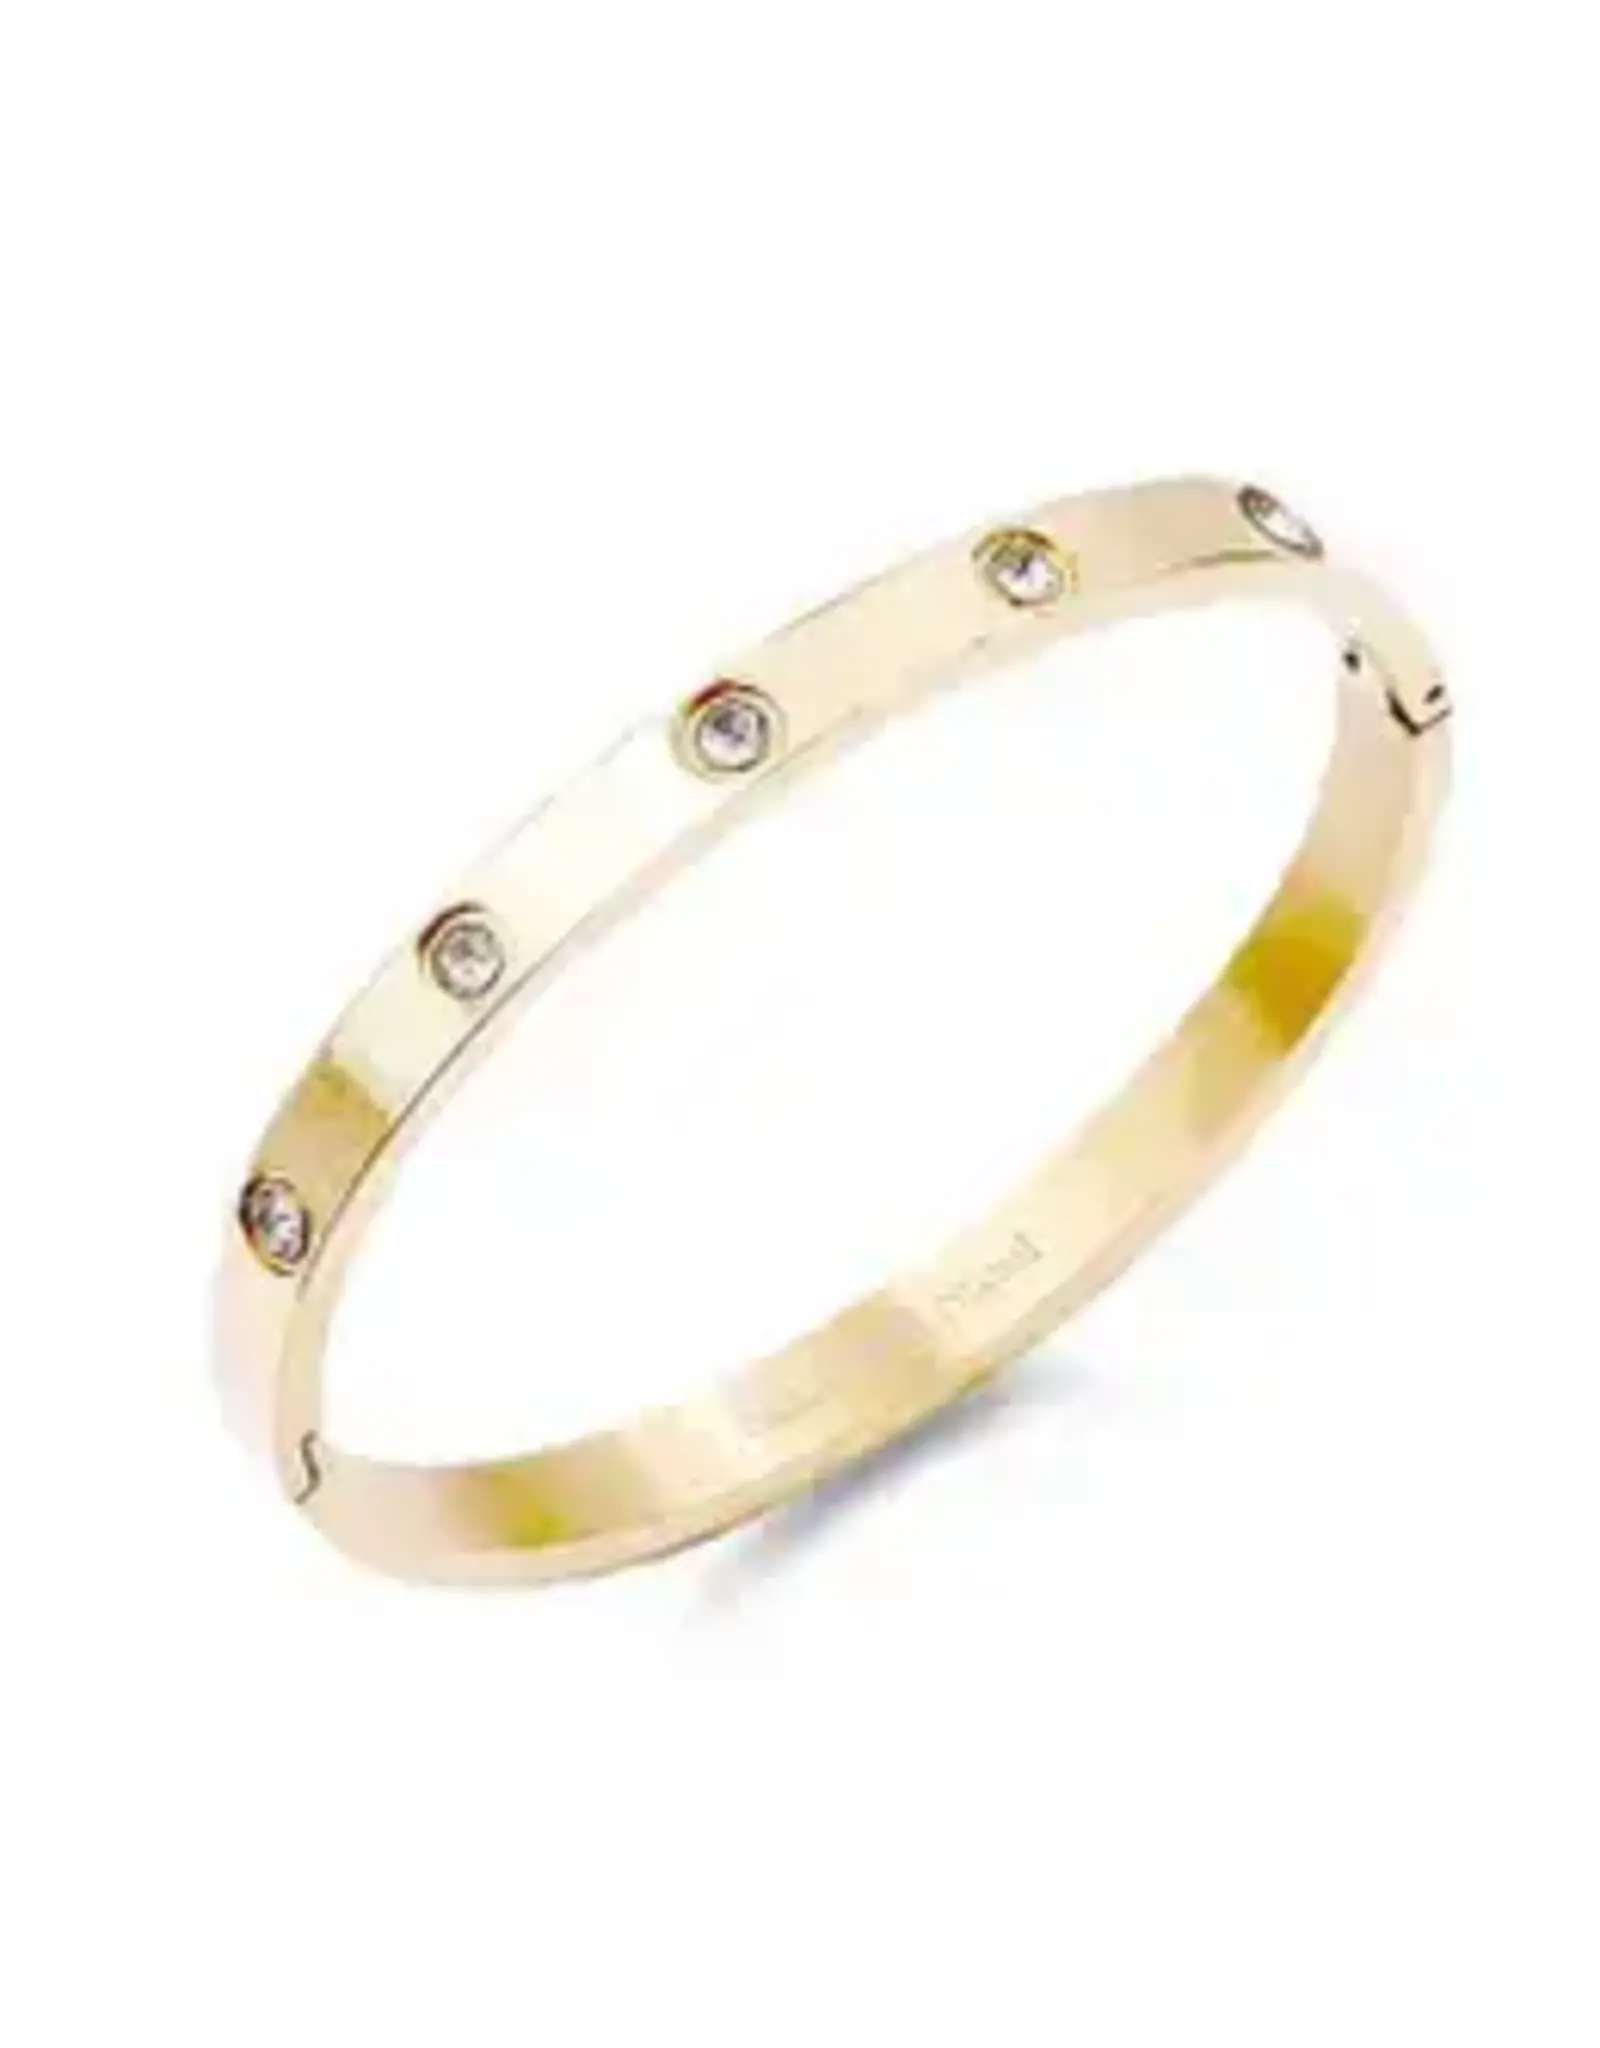 Gold Jeweled Stainless Steel Bangle